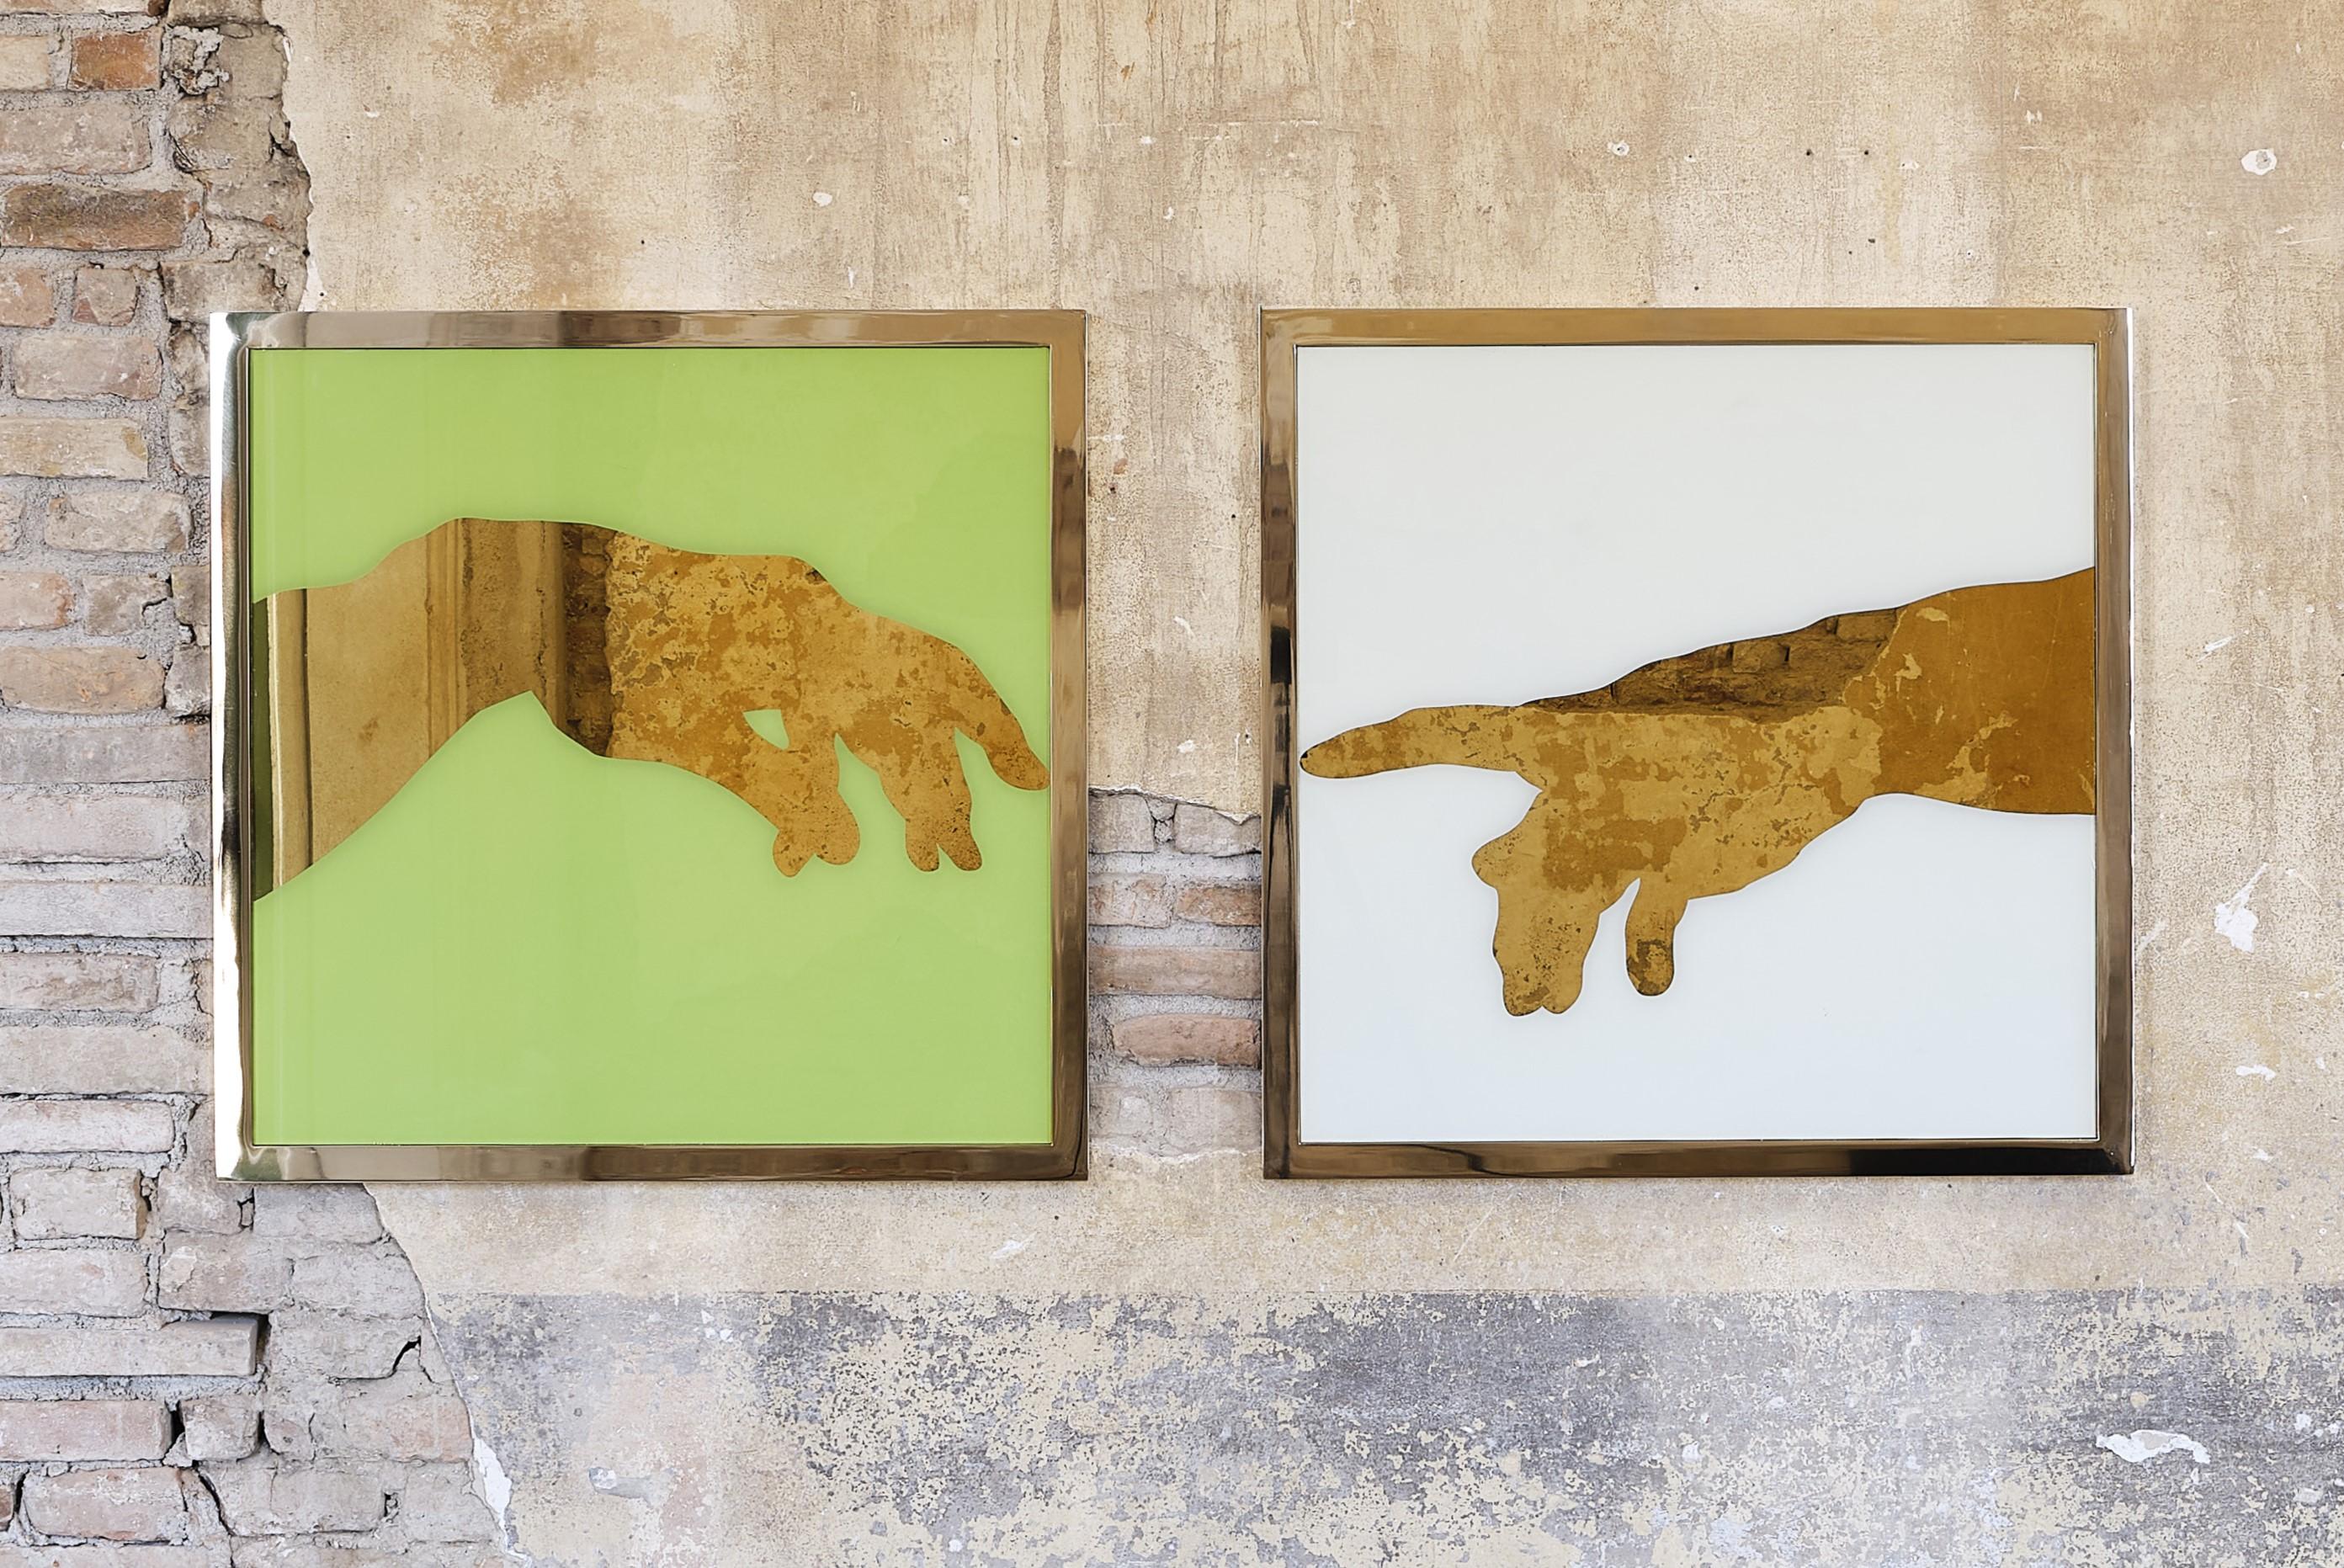 Set of 2 Michelangelo, The Creation, Icon Wall Decoration by Davide Medri
Dimensions: D 10 x W 82 x H 82 cm (each).
Materials: Golden mirror, metal structure.

Davide Medri was born in Cesena on August 7th 1967 and graduated at the Academy of Fine